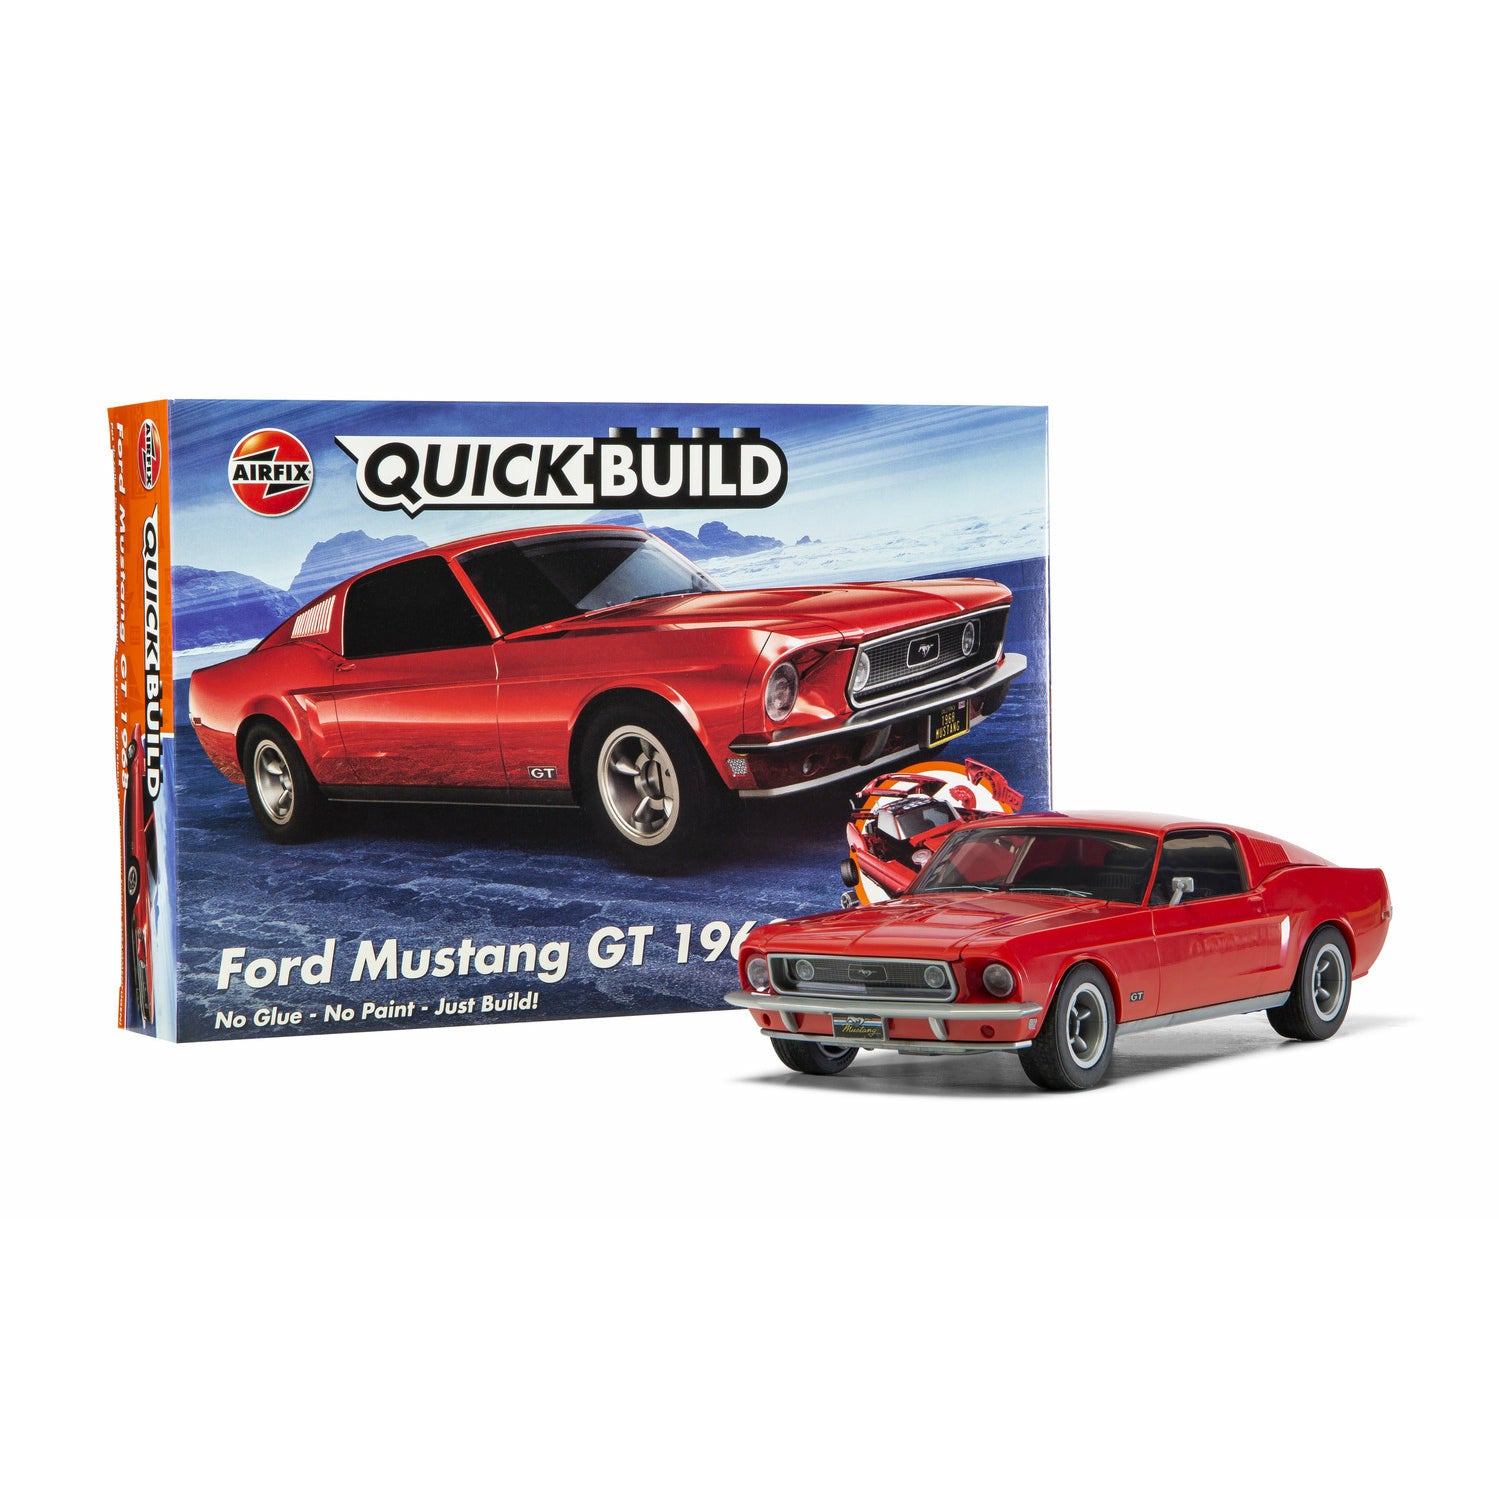 Ford Mustang Gt 1968 1/24 Quick Build Car Kit #J6035